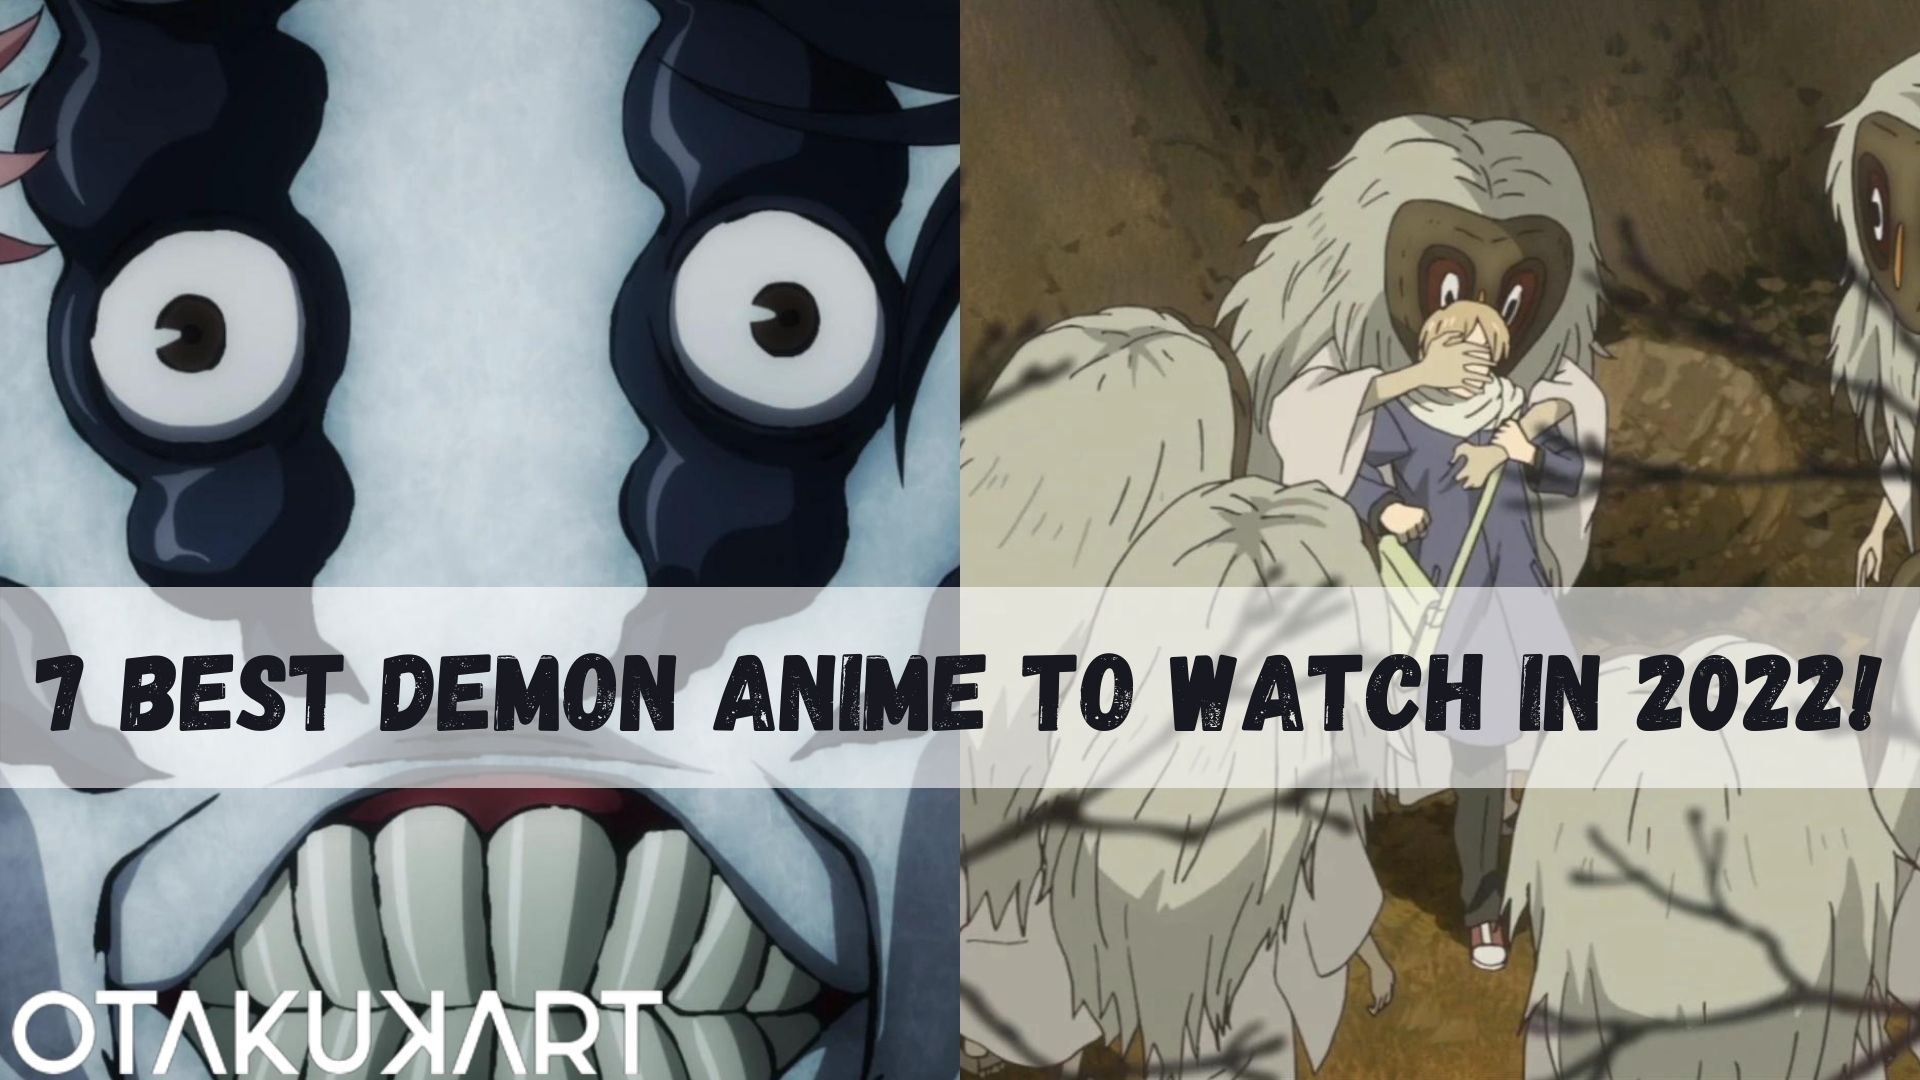 Best Demon Anime To Watch In 2022!